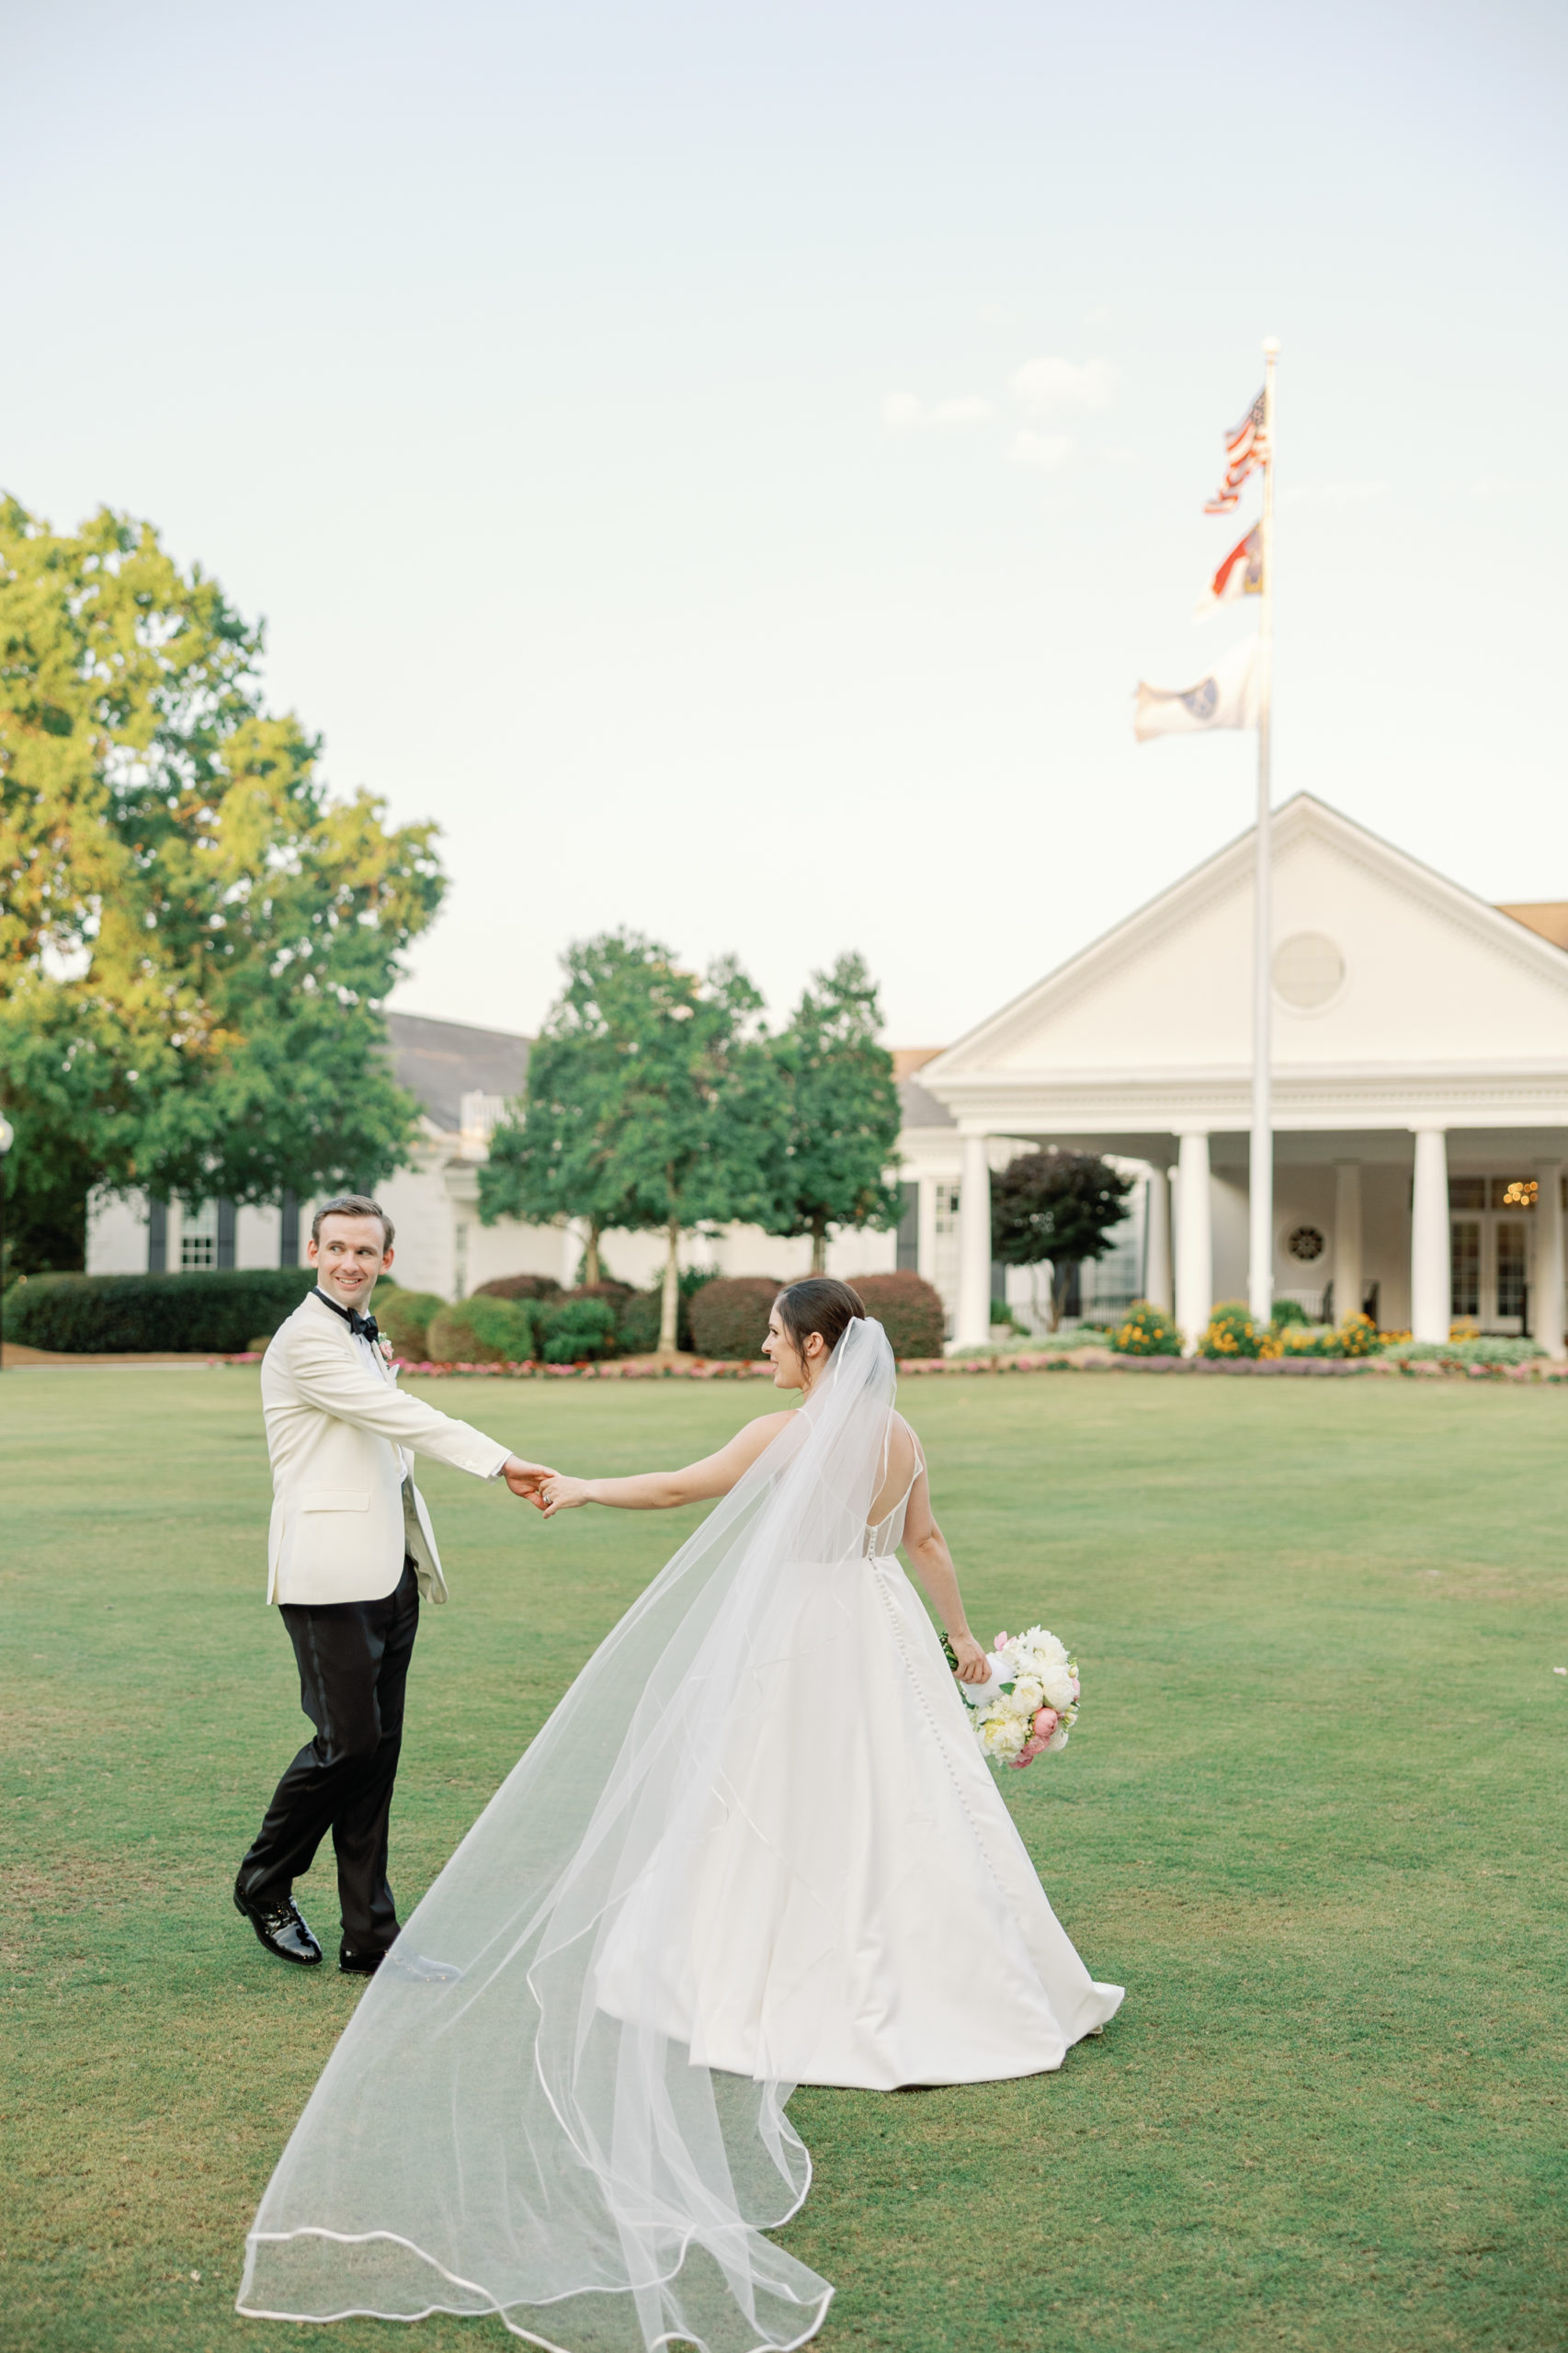 bride with veil and groom with white tuxedo walk towards charlotte country club wedding